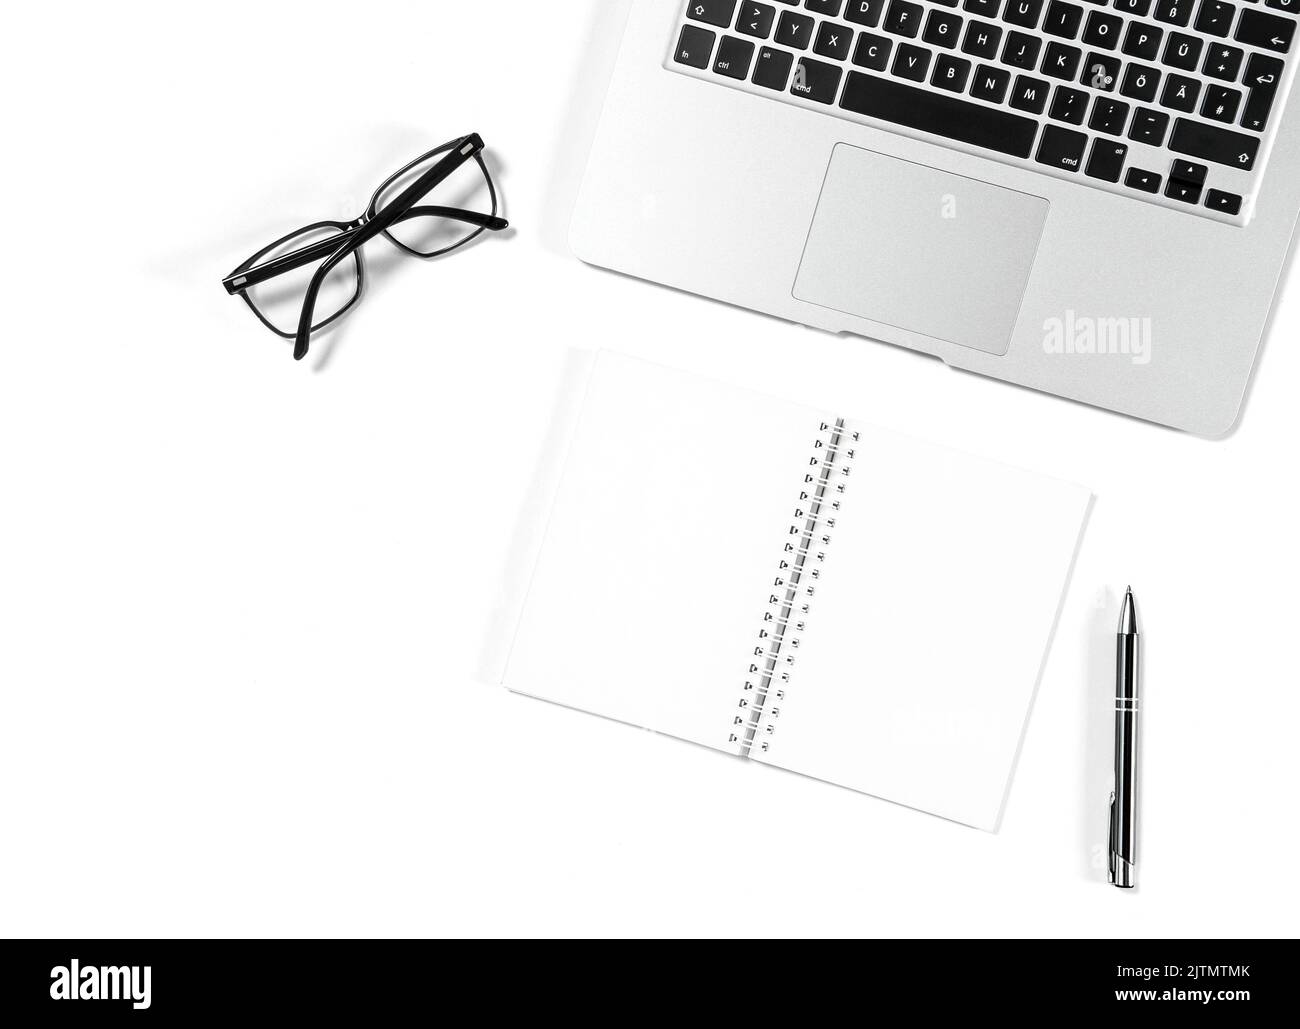 Office workplace flat lay background. Laptop, notebook, glasses on white Stock Photo